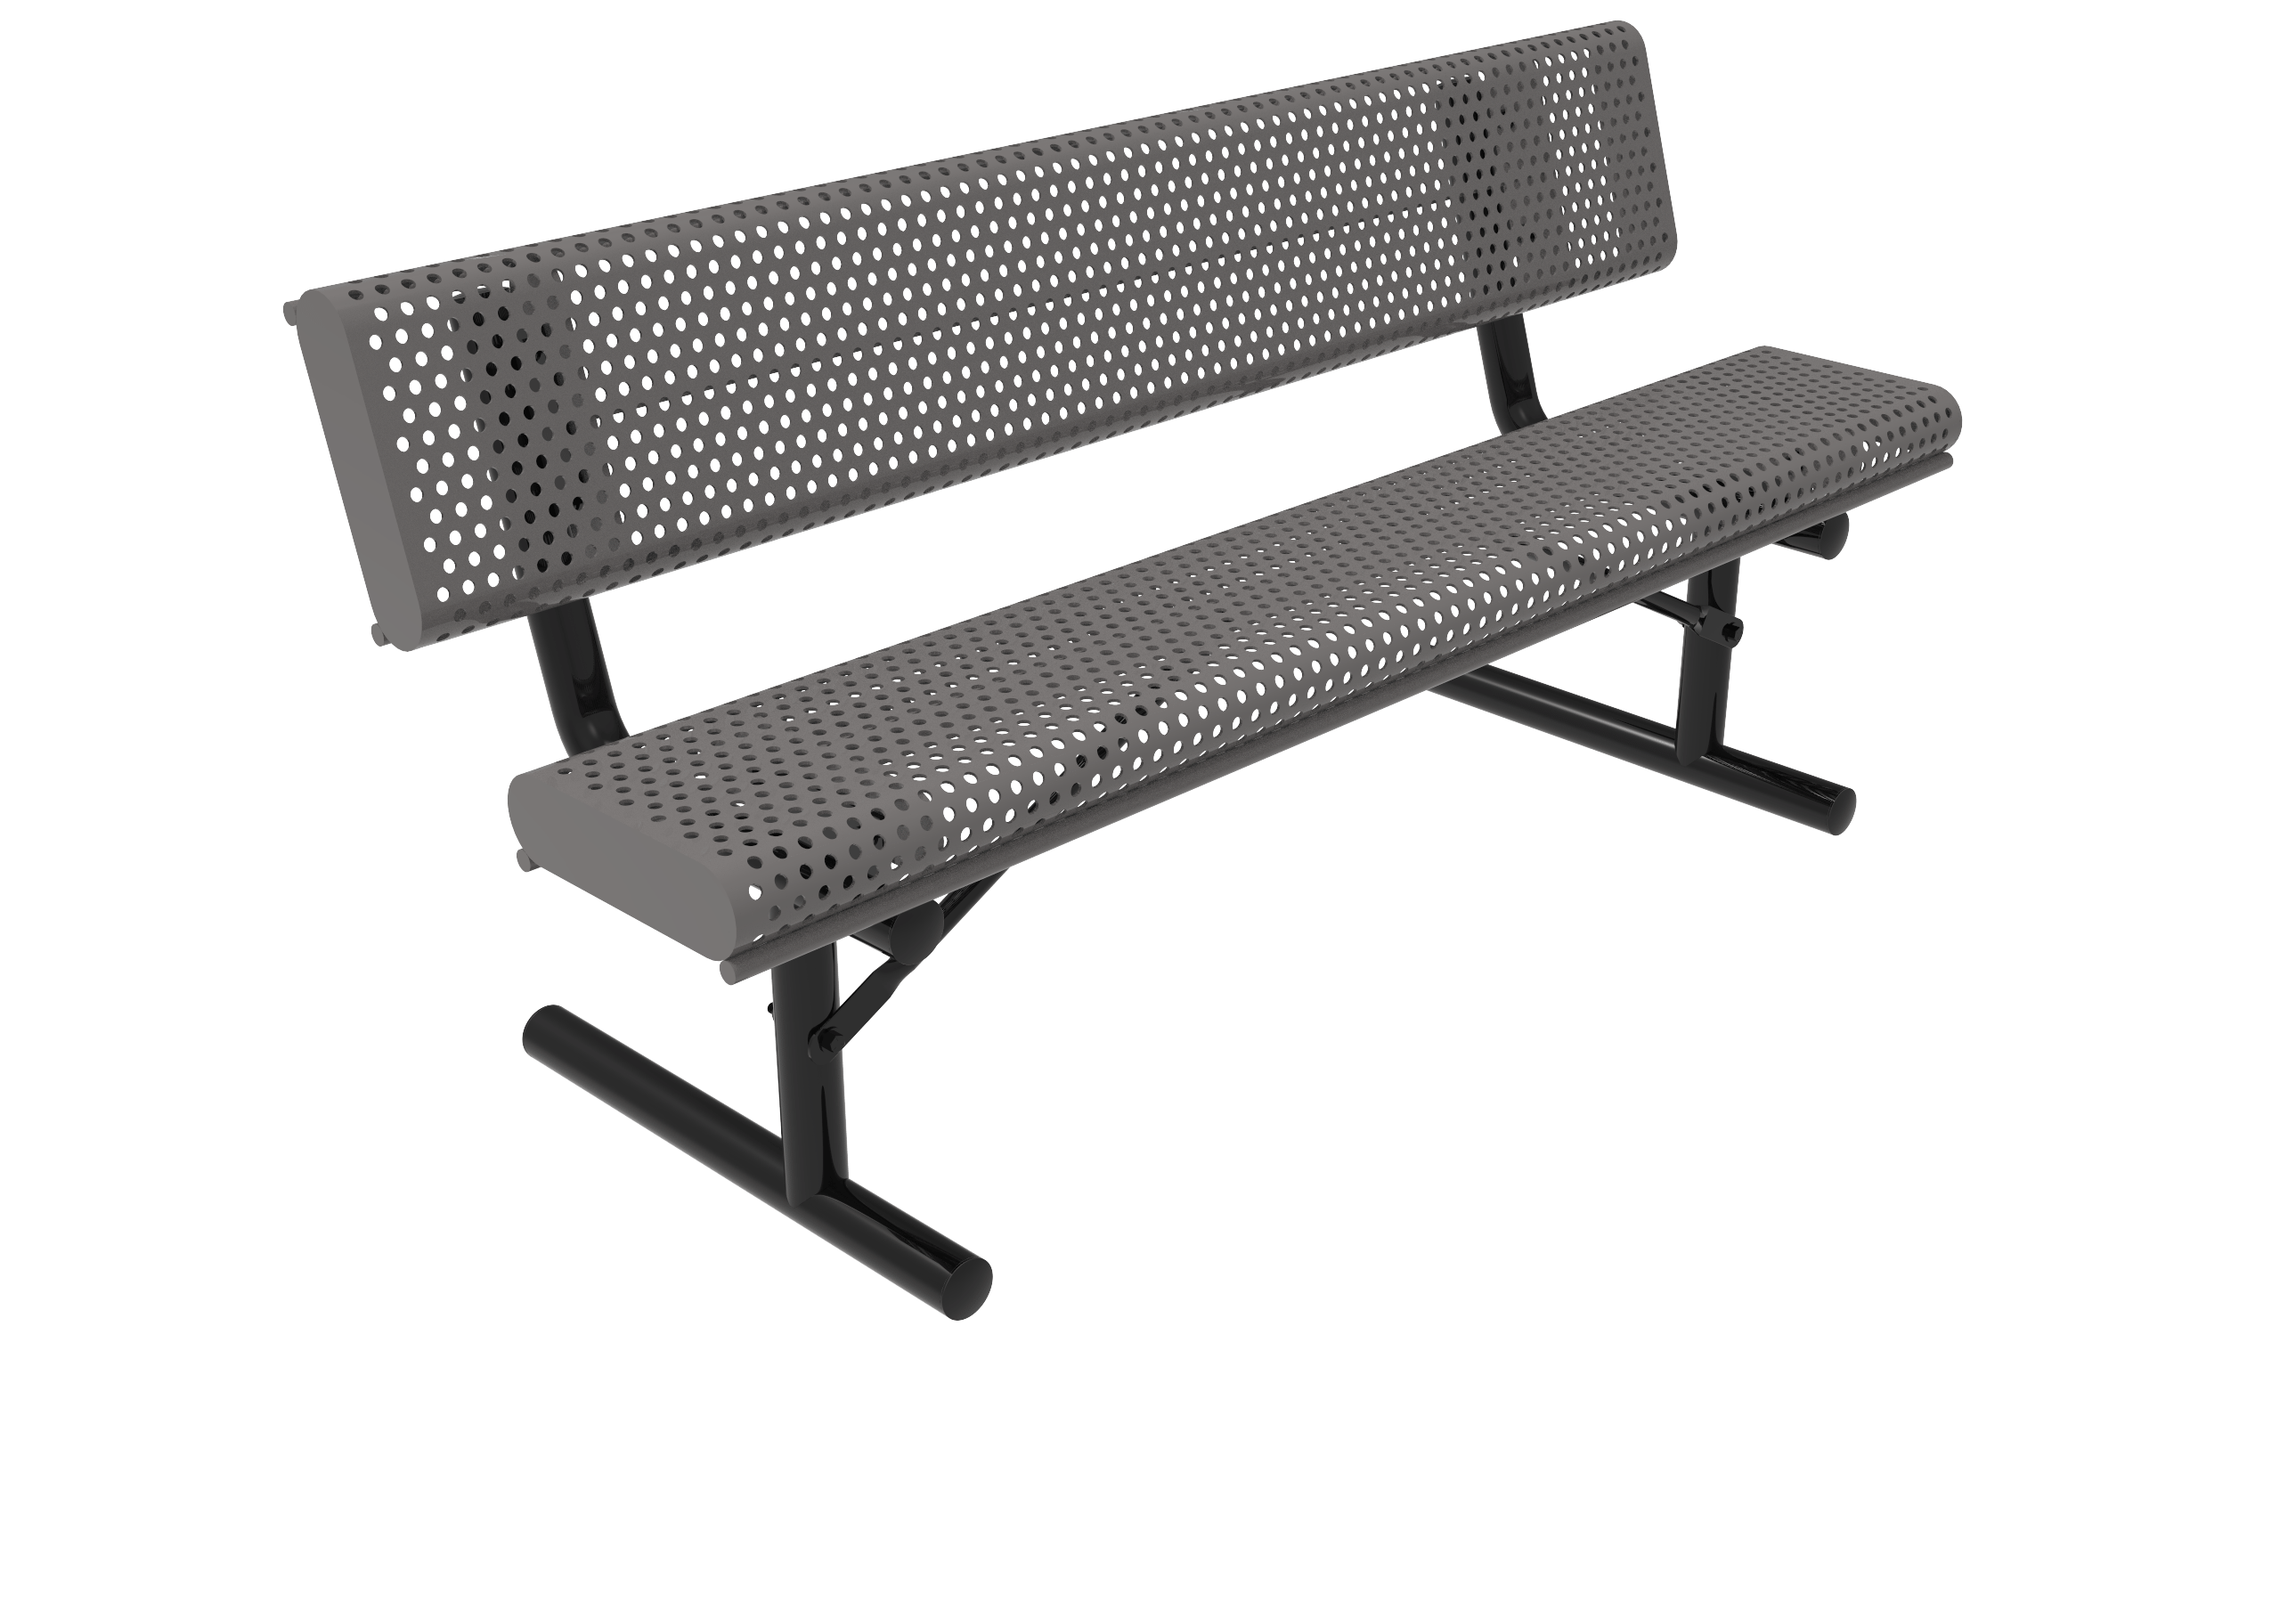 6′ Rolled Bench With Back-Punched
BRE06-D-18-000
Industry Standard Finish
$919.00
BRE06-B-18-000
Advantage Premium Finish
$1119.00
